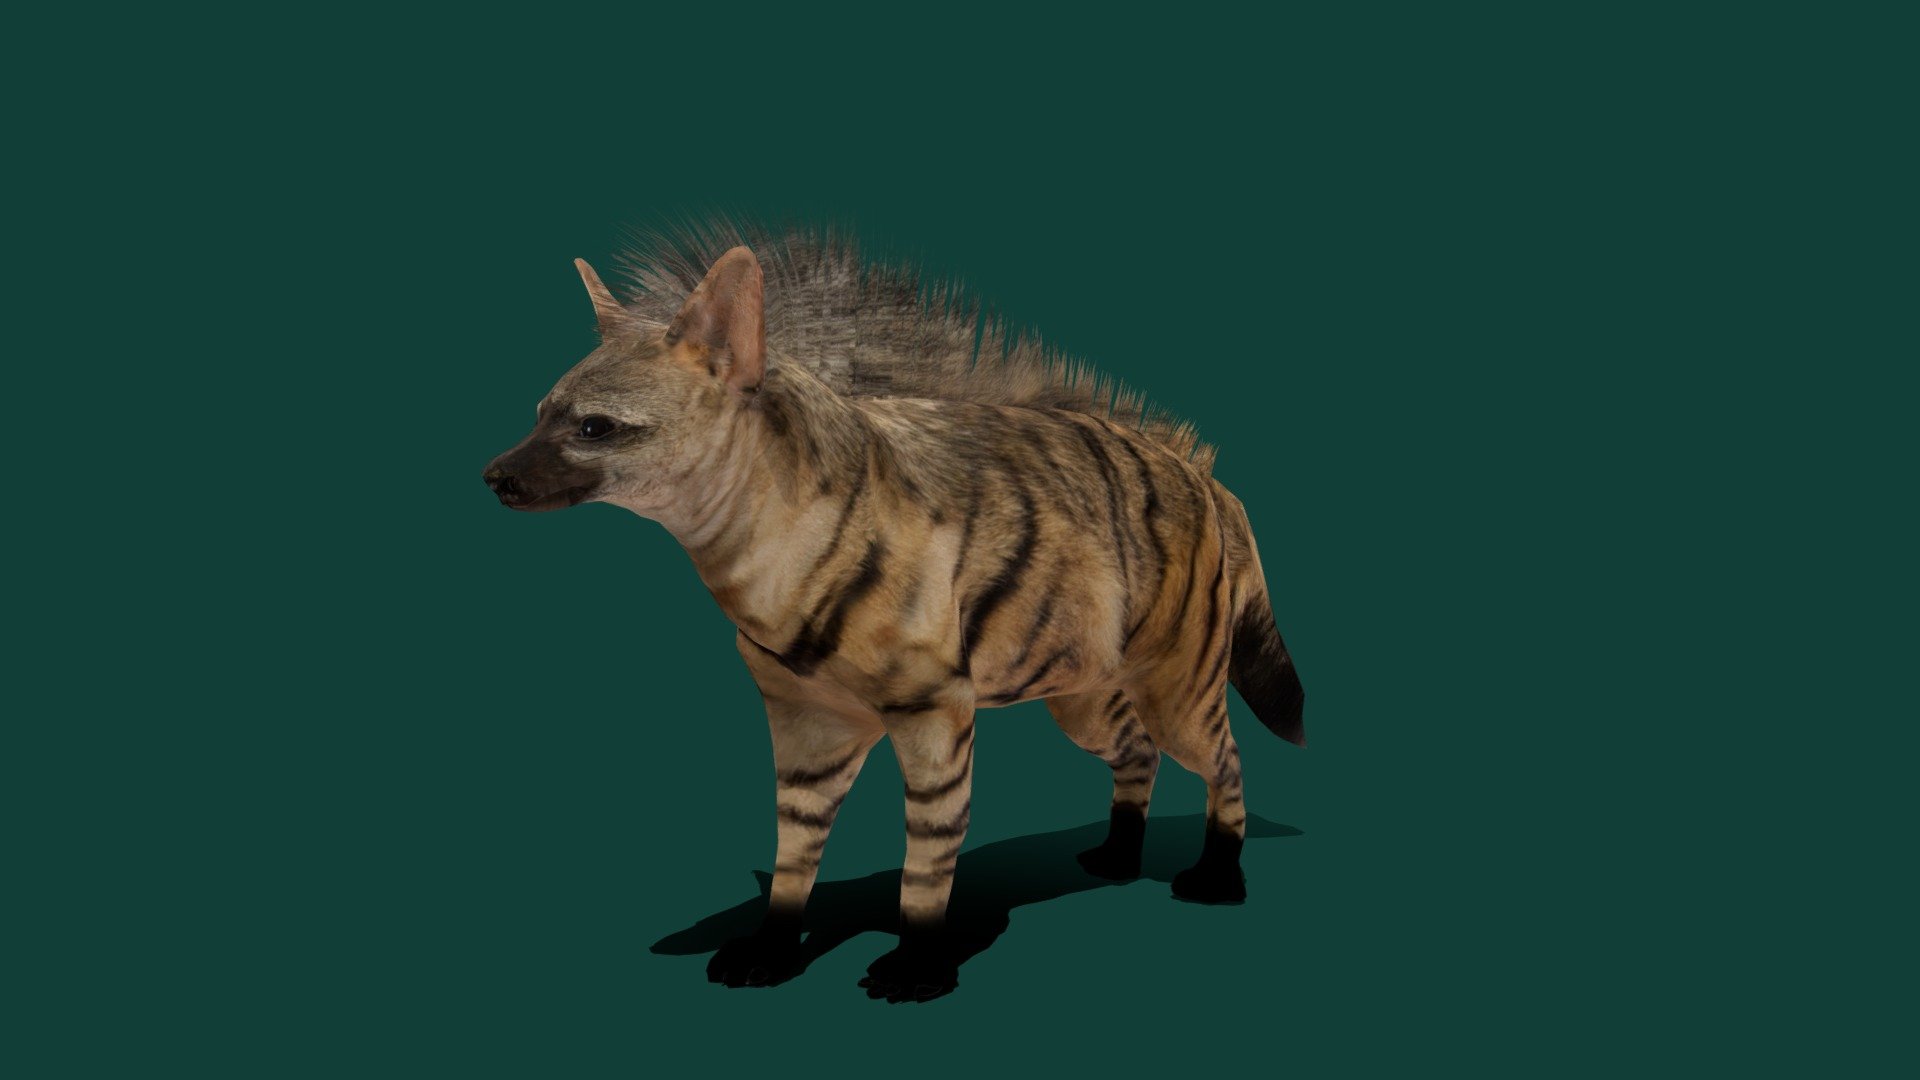 Aardwolf Hyena (Earth-wolf) Species of Hyena 

Proteles cristata Animal Mammal ( Hyaenidae) Animalia

1 Draw Calls

Lowpoly

Game Ready Asset

Subdivision Surface Ready

11 Animations

4K PBR Textures Materials

Unreal FBX (Unreal 4,5 Plus)

Unity FBX

Blend File 3.6.5 LTS

USDZ File (AR Ready). Real Scale Dimension (Xcode ,Reality Composer, Keynote Ready)

Textures Files

GLB File (Unreal 5.1 Plus Native Support)

Gltf File ( Spark AR, Lens Studio(SnapChat) , Effector(Tiktok) , Spline, Play Canvas,Omiverse ) Compatible

Triangles -9861

Faces     -6795

Edges     -14051

Vertices  -7749

Diffuse, Metallic, Roughness , Normal Map ,Specular Map,AO,
 The aardwolf is an insectivorous species of hyena, native to East and Southern Africa. Its name means &ldquo;earth-wolf